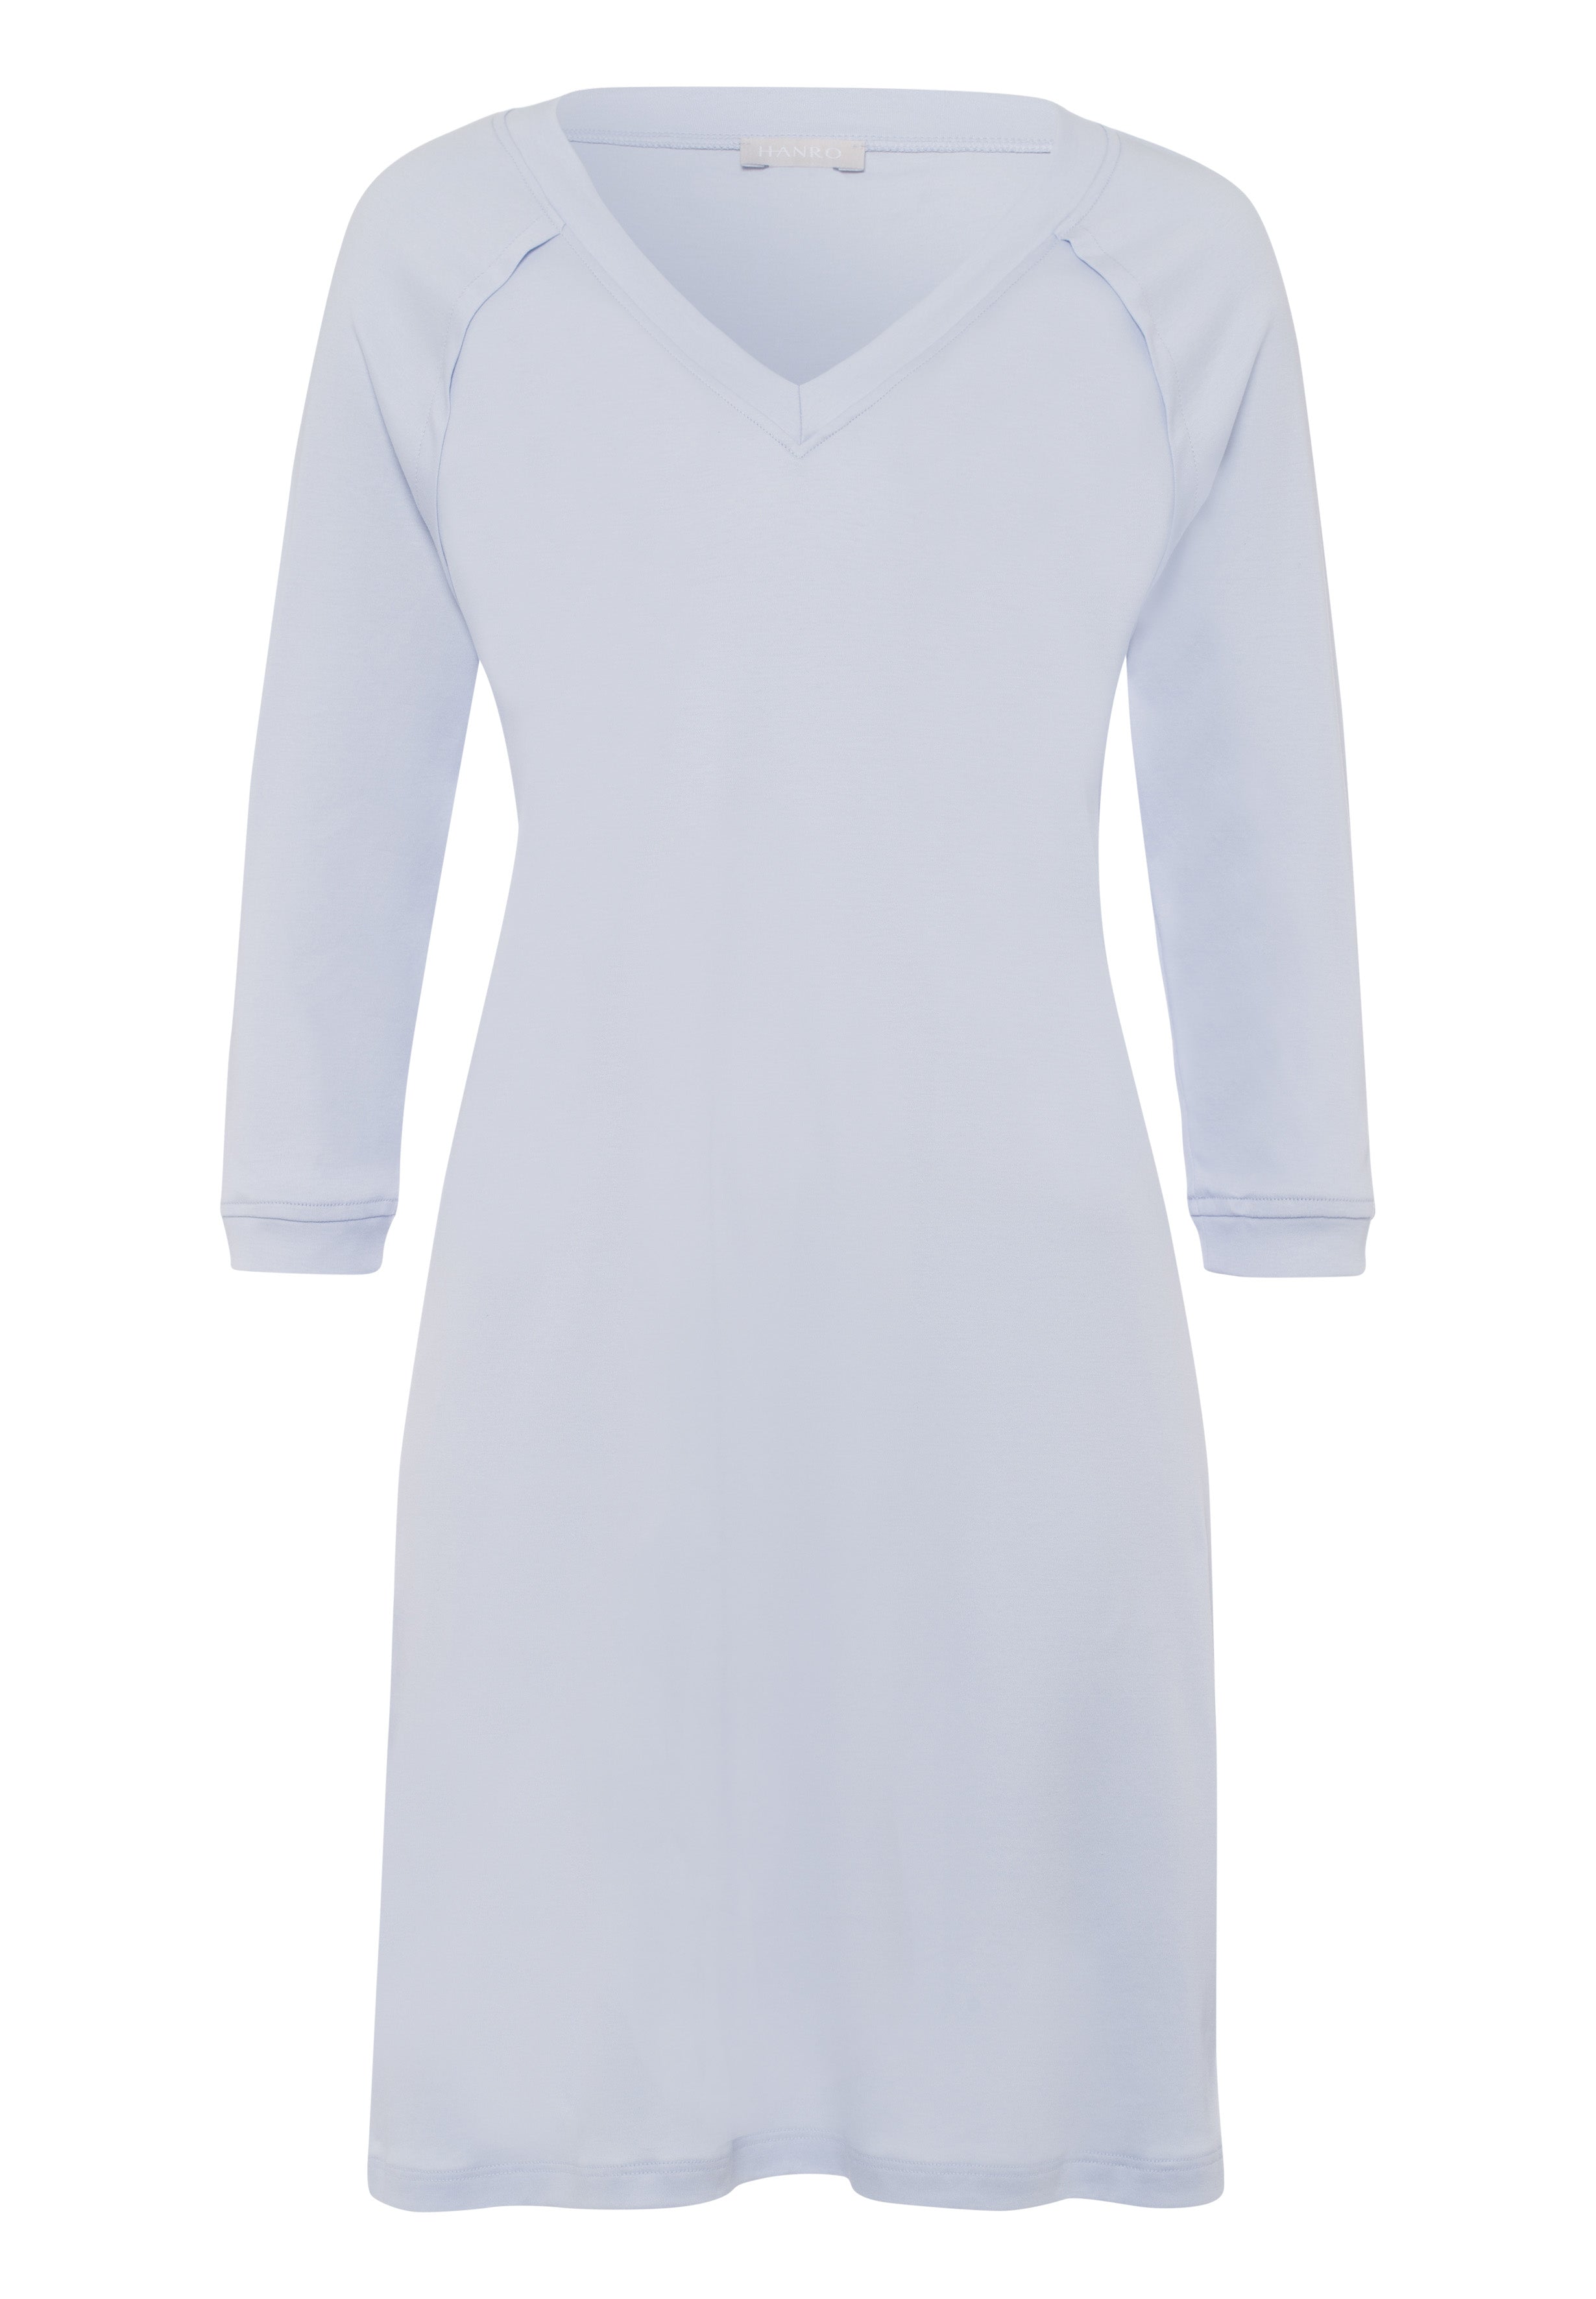 77948 Pure Essence 3/4 Sleeve Gown - 511 Blue Glow